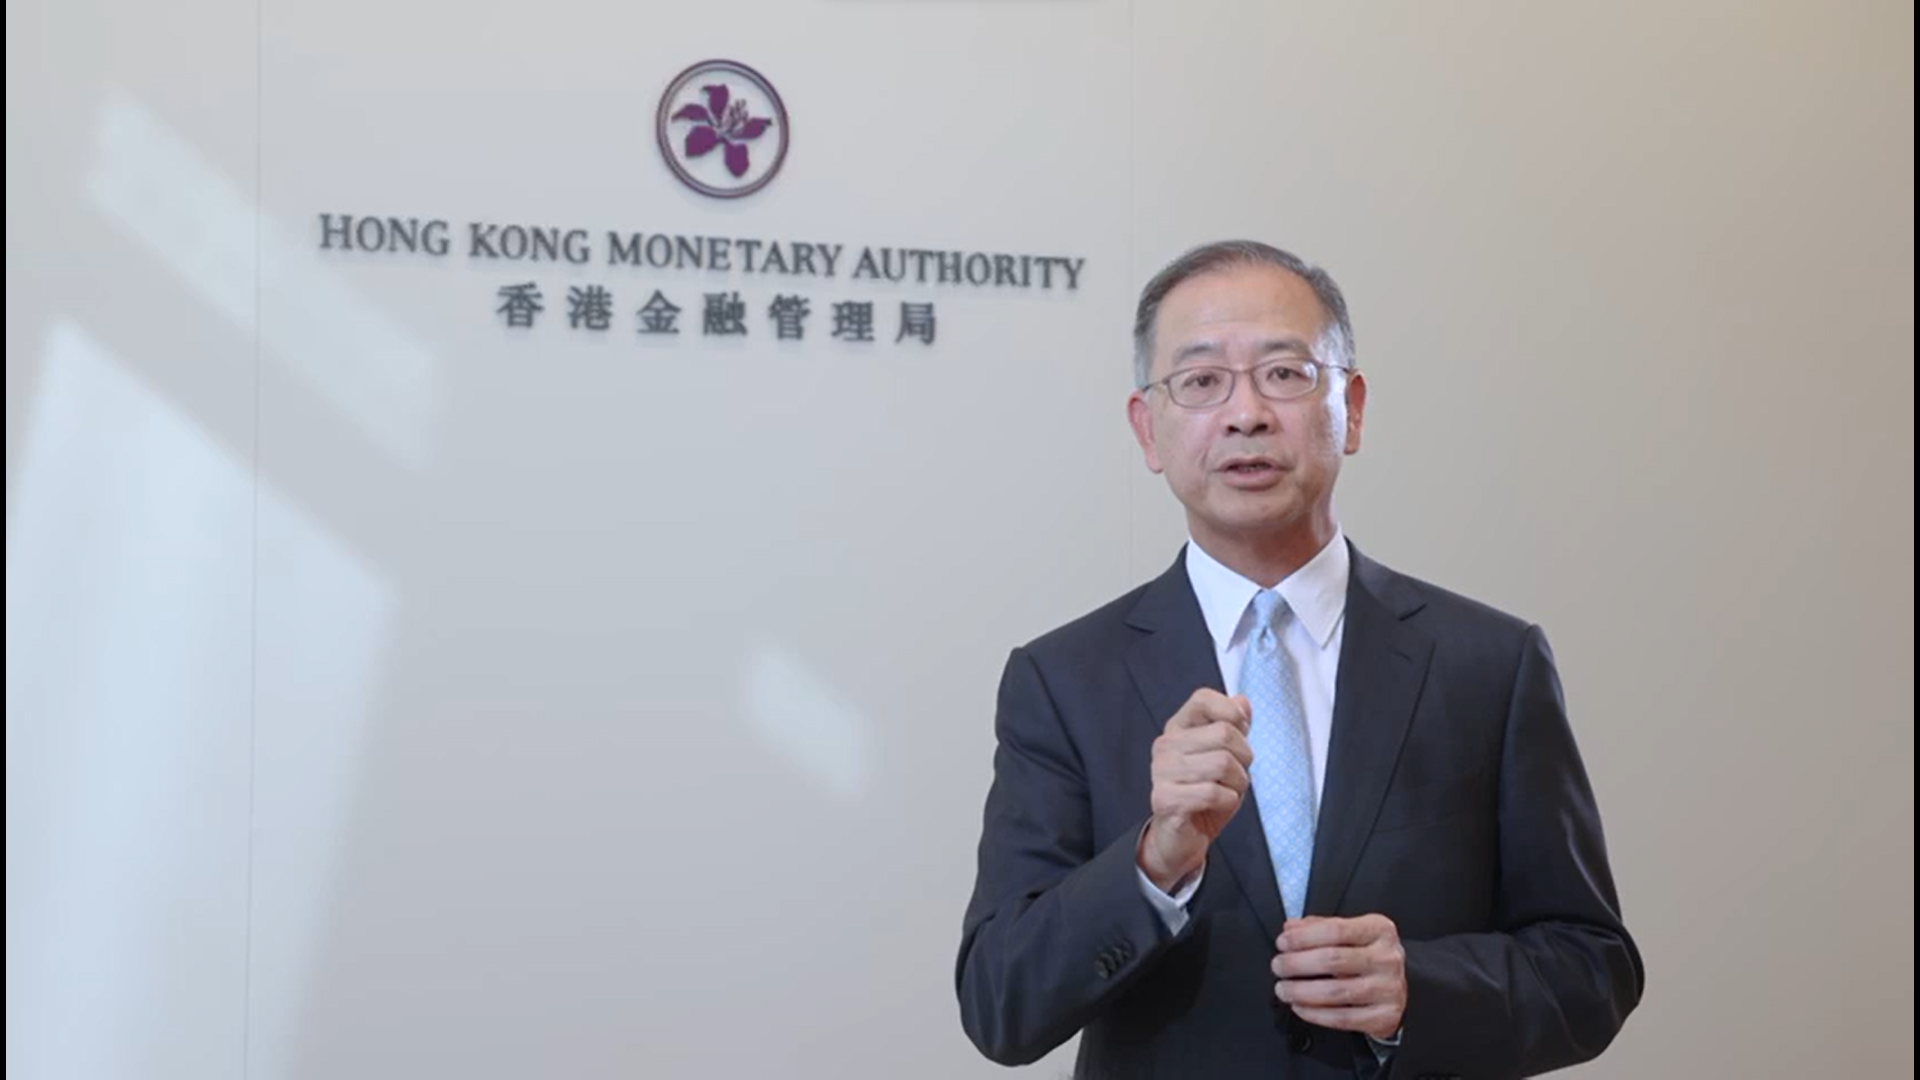 The Chief Executive of the Hong Kong Monetary Authority, Mr Eddie Yue, welcomes the launch of Anti-Deception Alliance. 